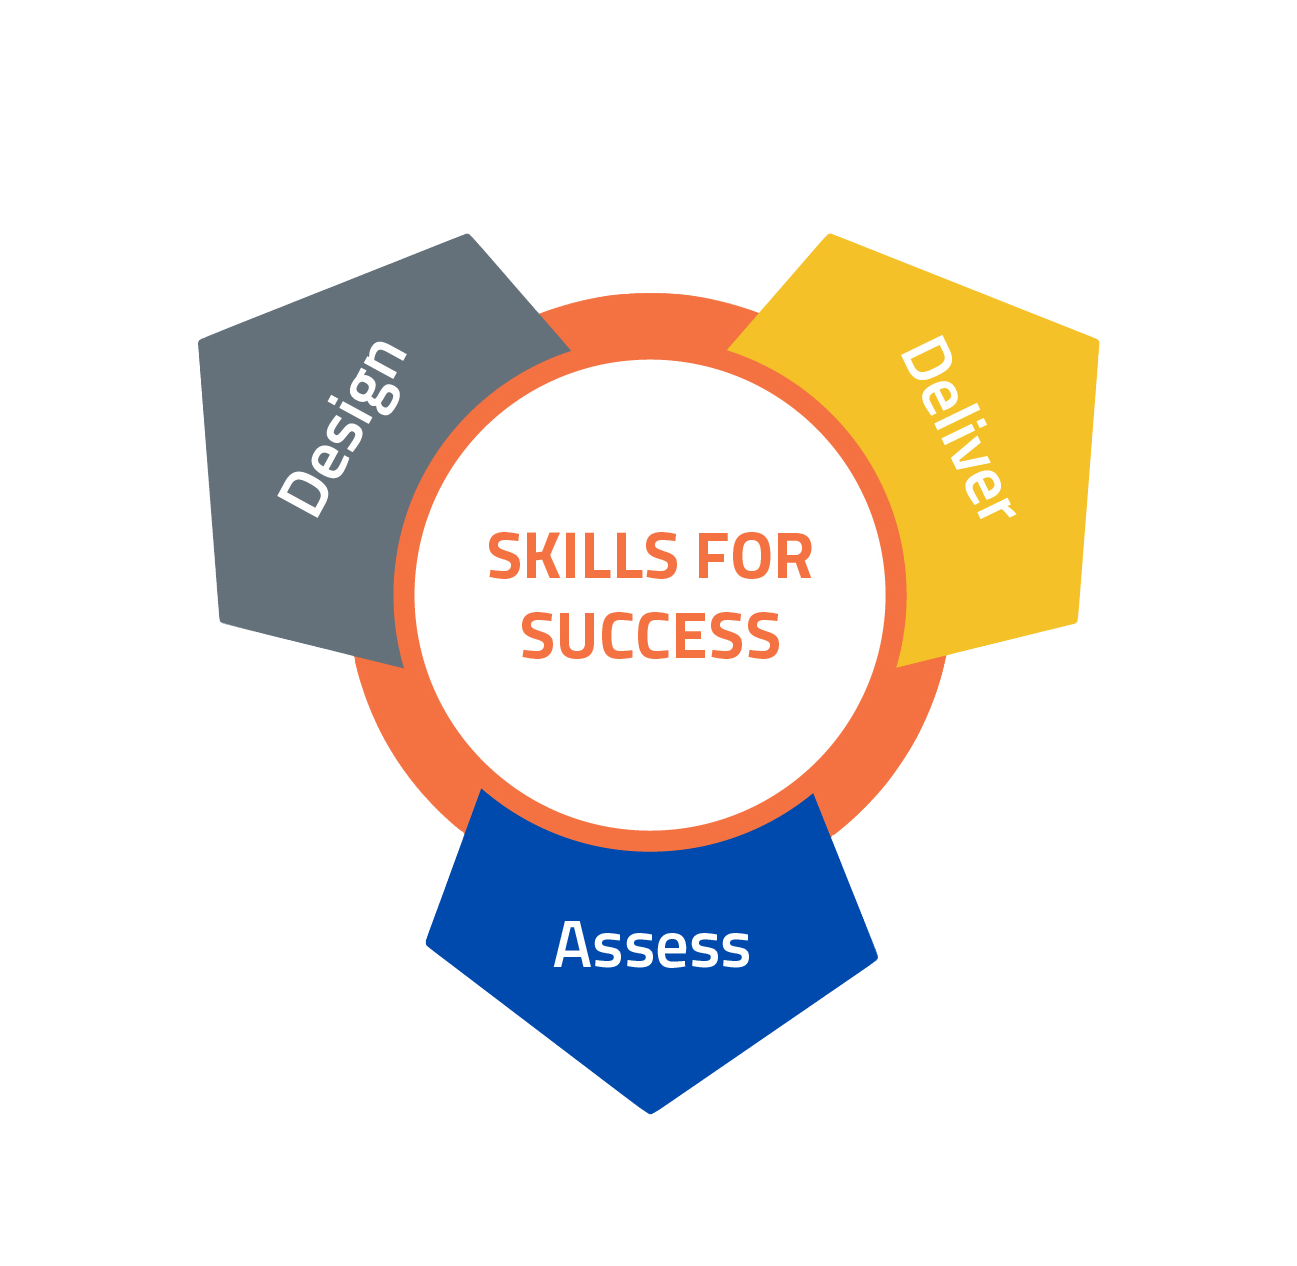 Skills for Success - Practitioner Tools & Resources